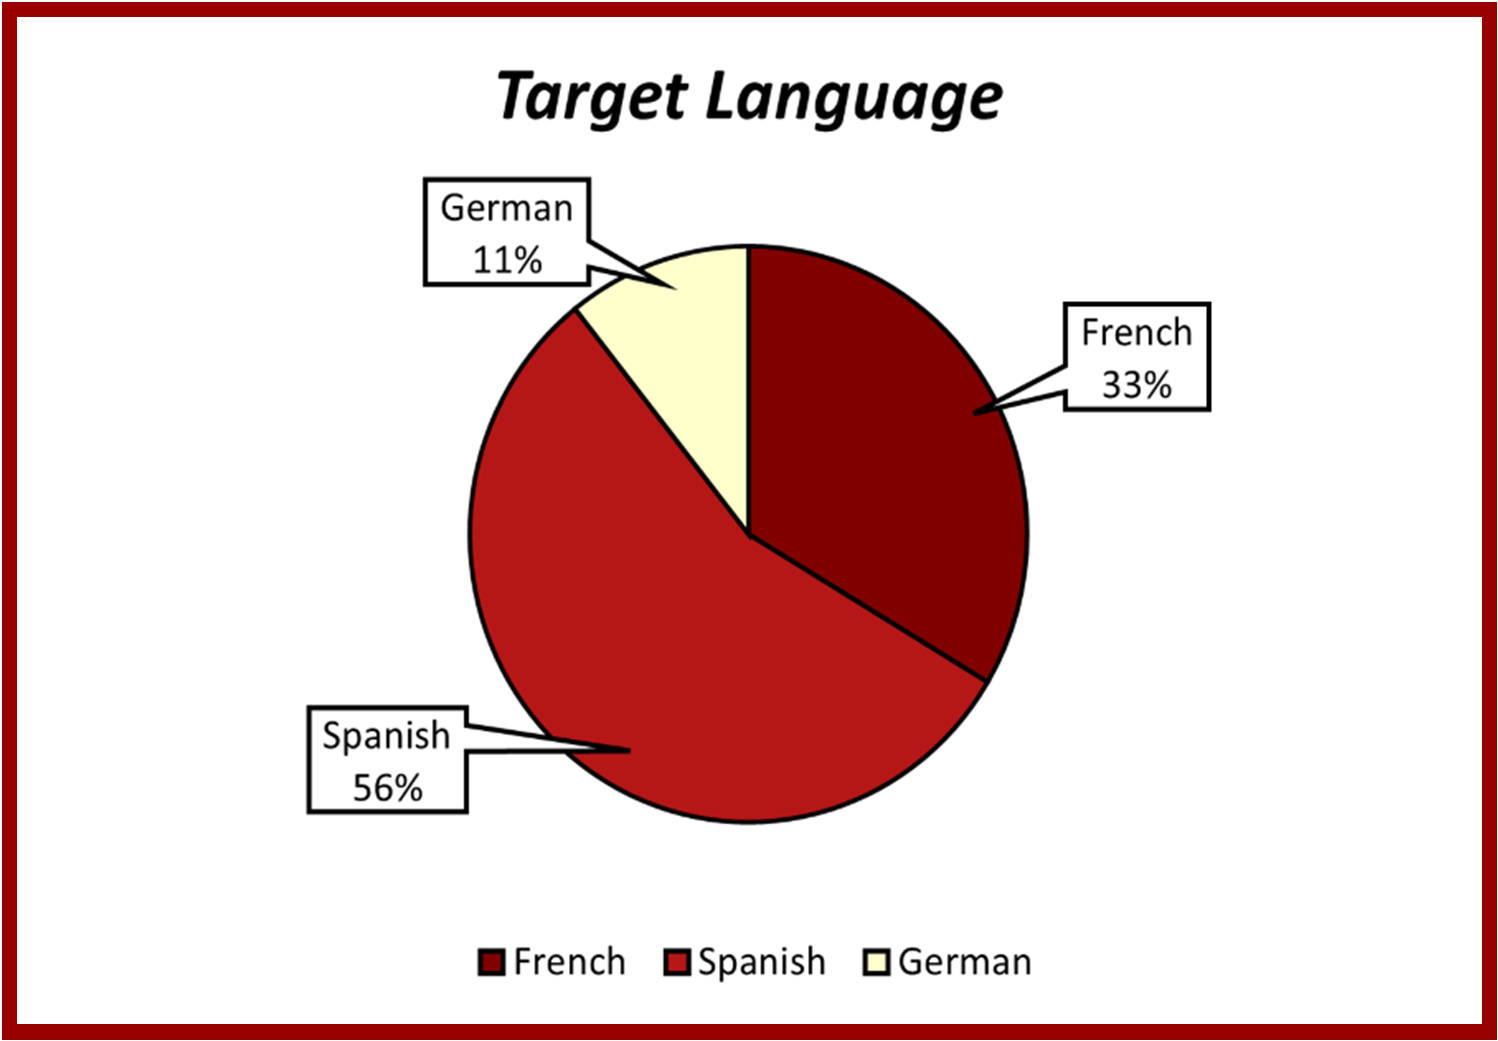 A pie chart breaking down the program by language